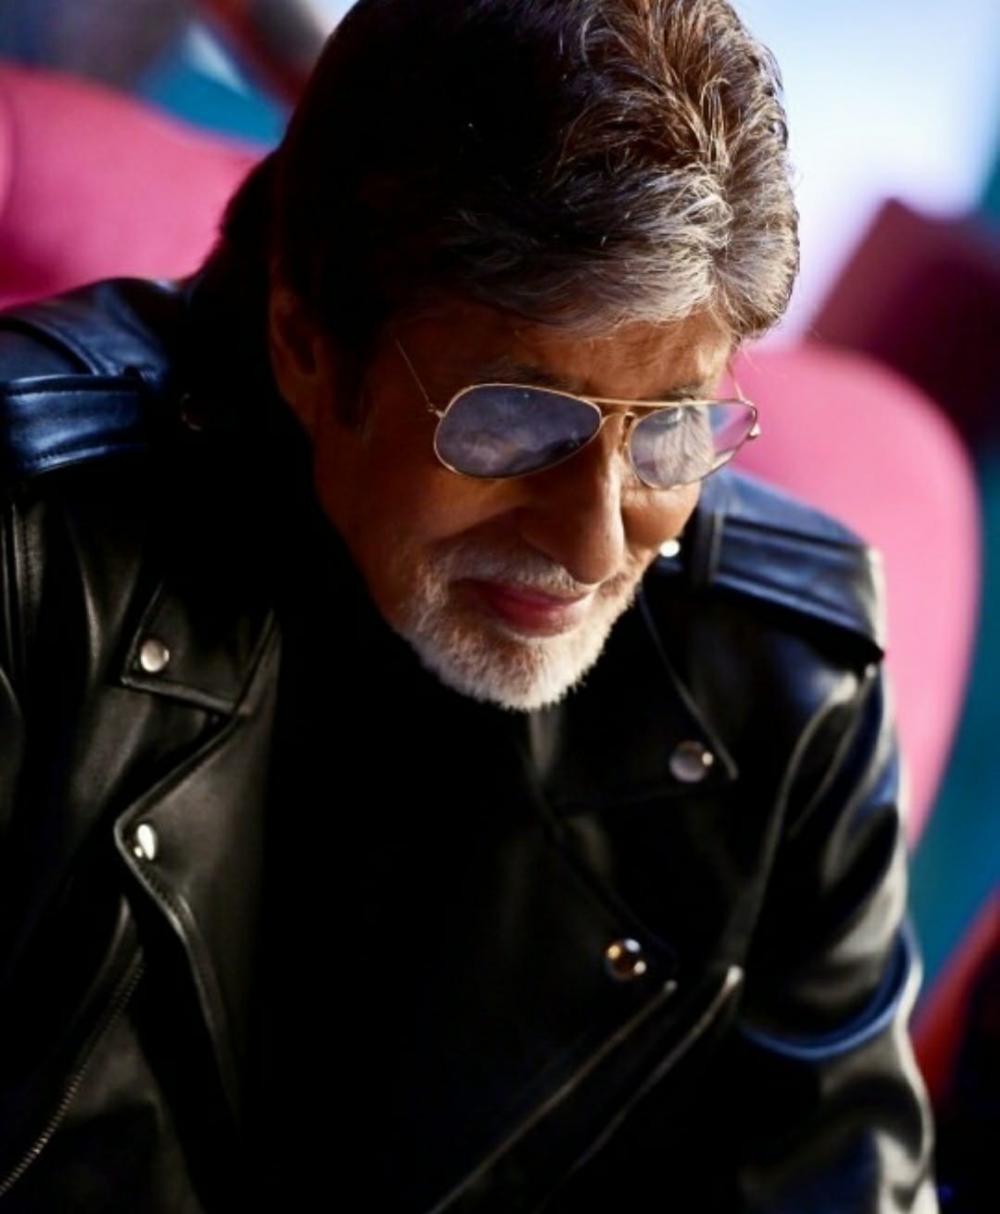 The Weekend Leader - Withdraw from ad campaign promoting pan masala: NGO to Big B